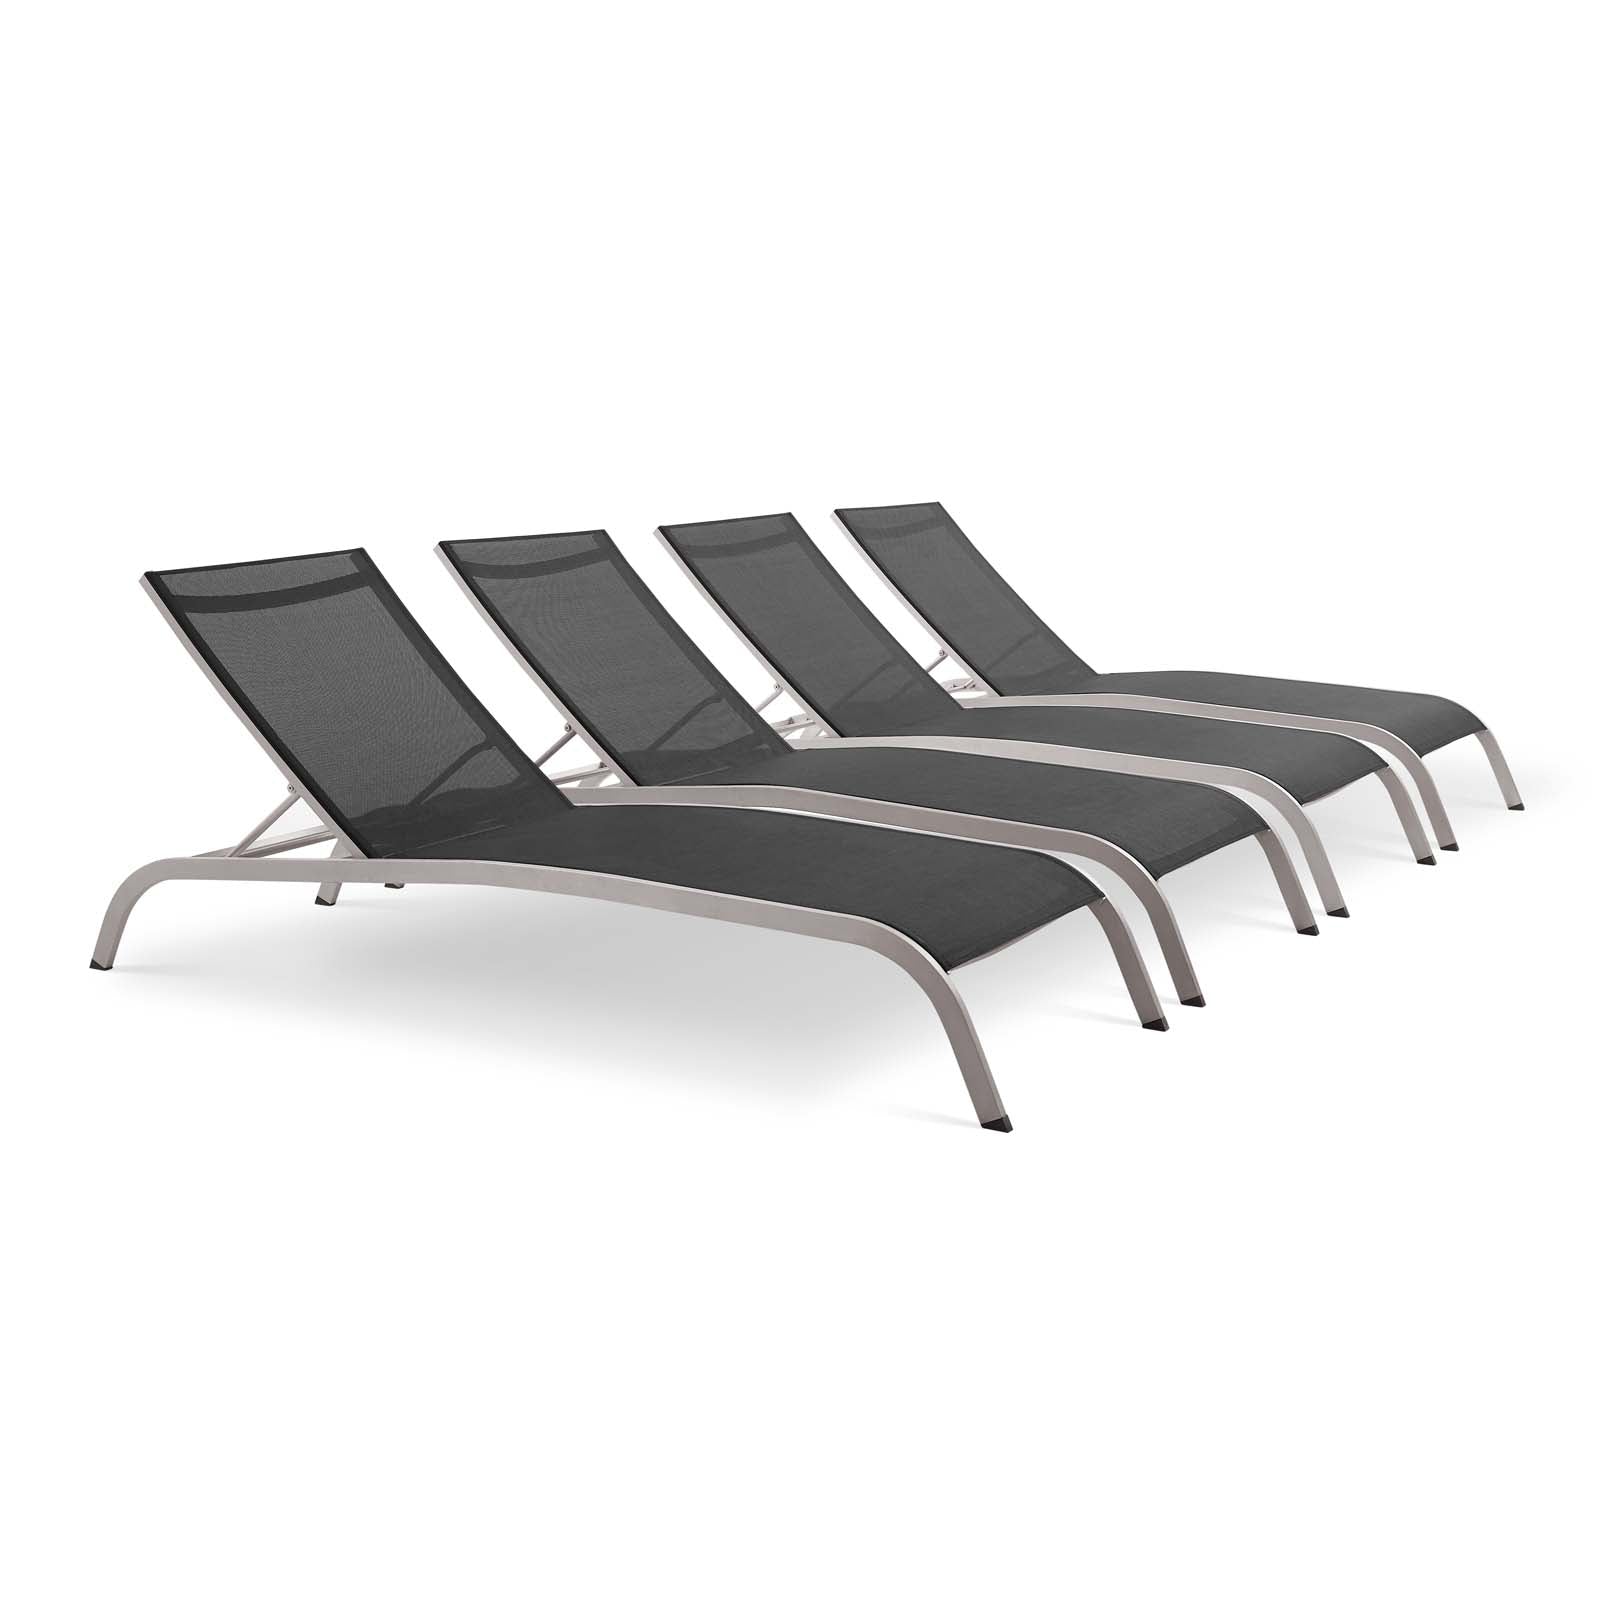 Modway Outdoor Loungers - Savannah Outdoor Patio Mesh Chaise Lounge Set of 4 Black